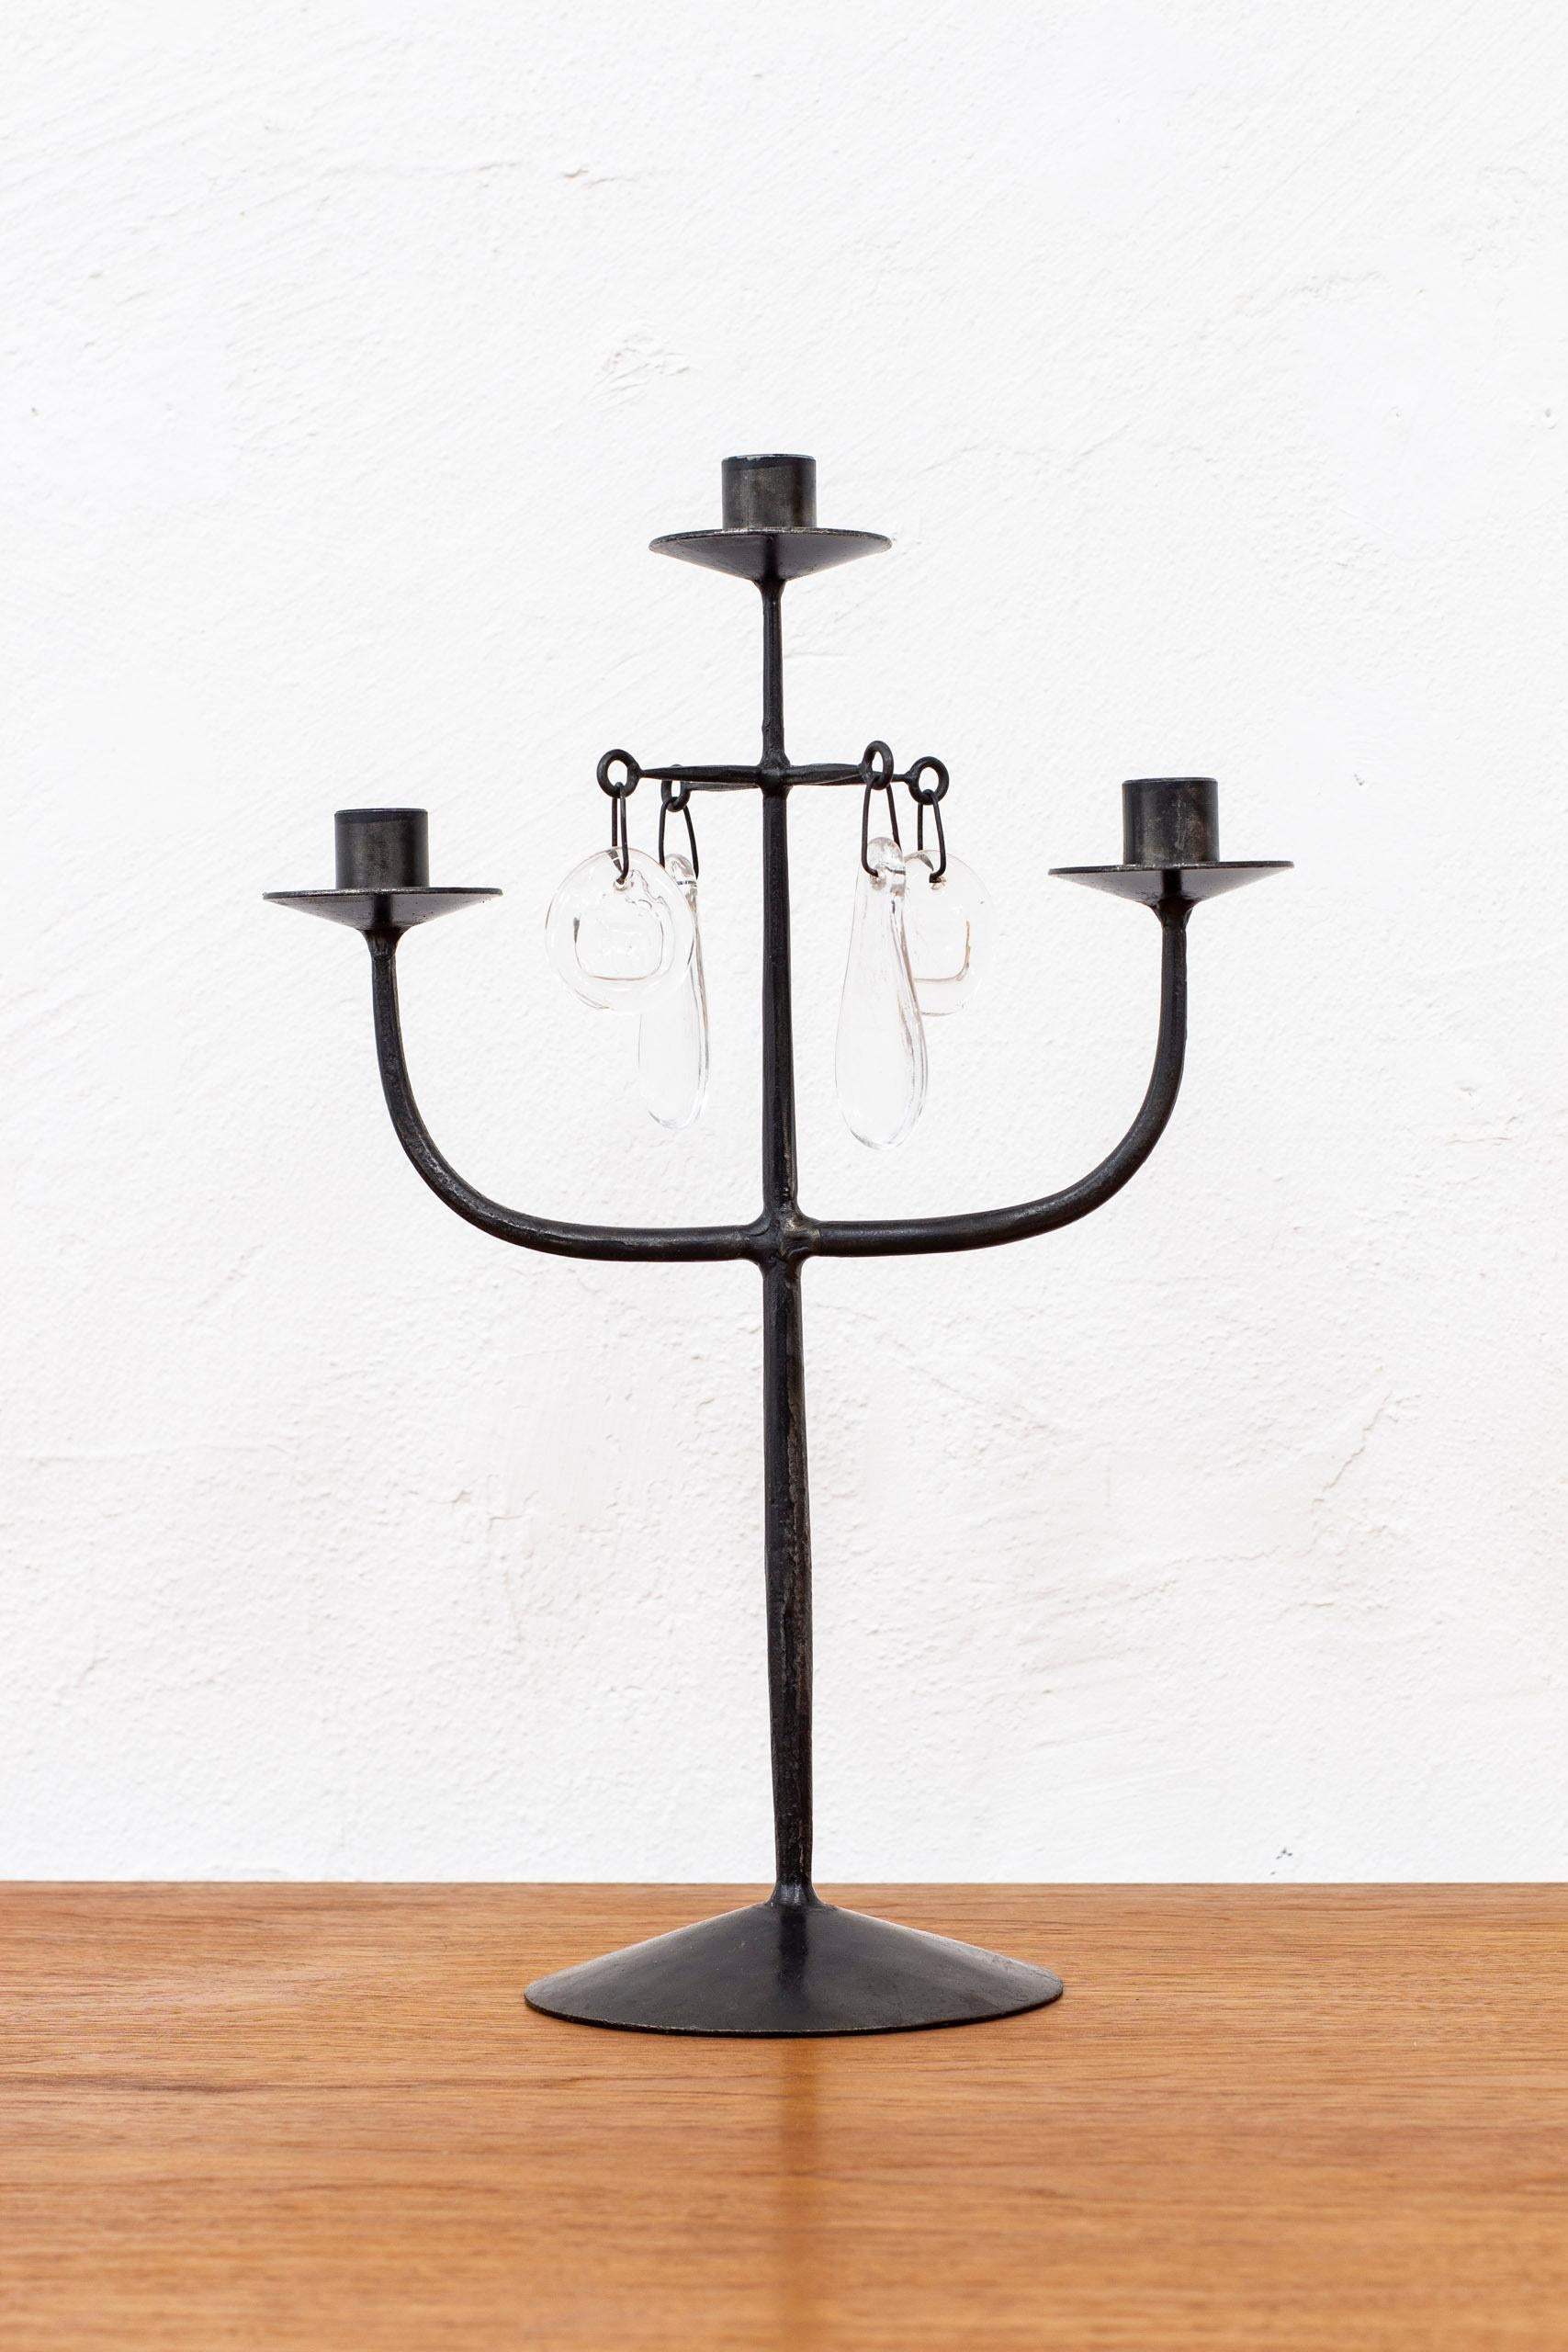 Blown Glass Candelabras in Forged Iron and Glass by Erik Höglund for Boda, Sweden, 1950s